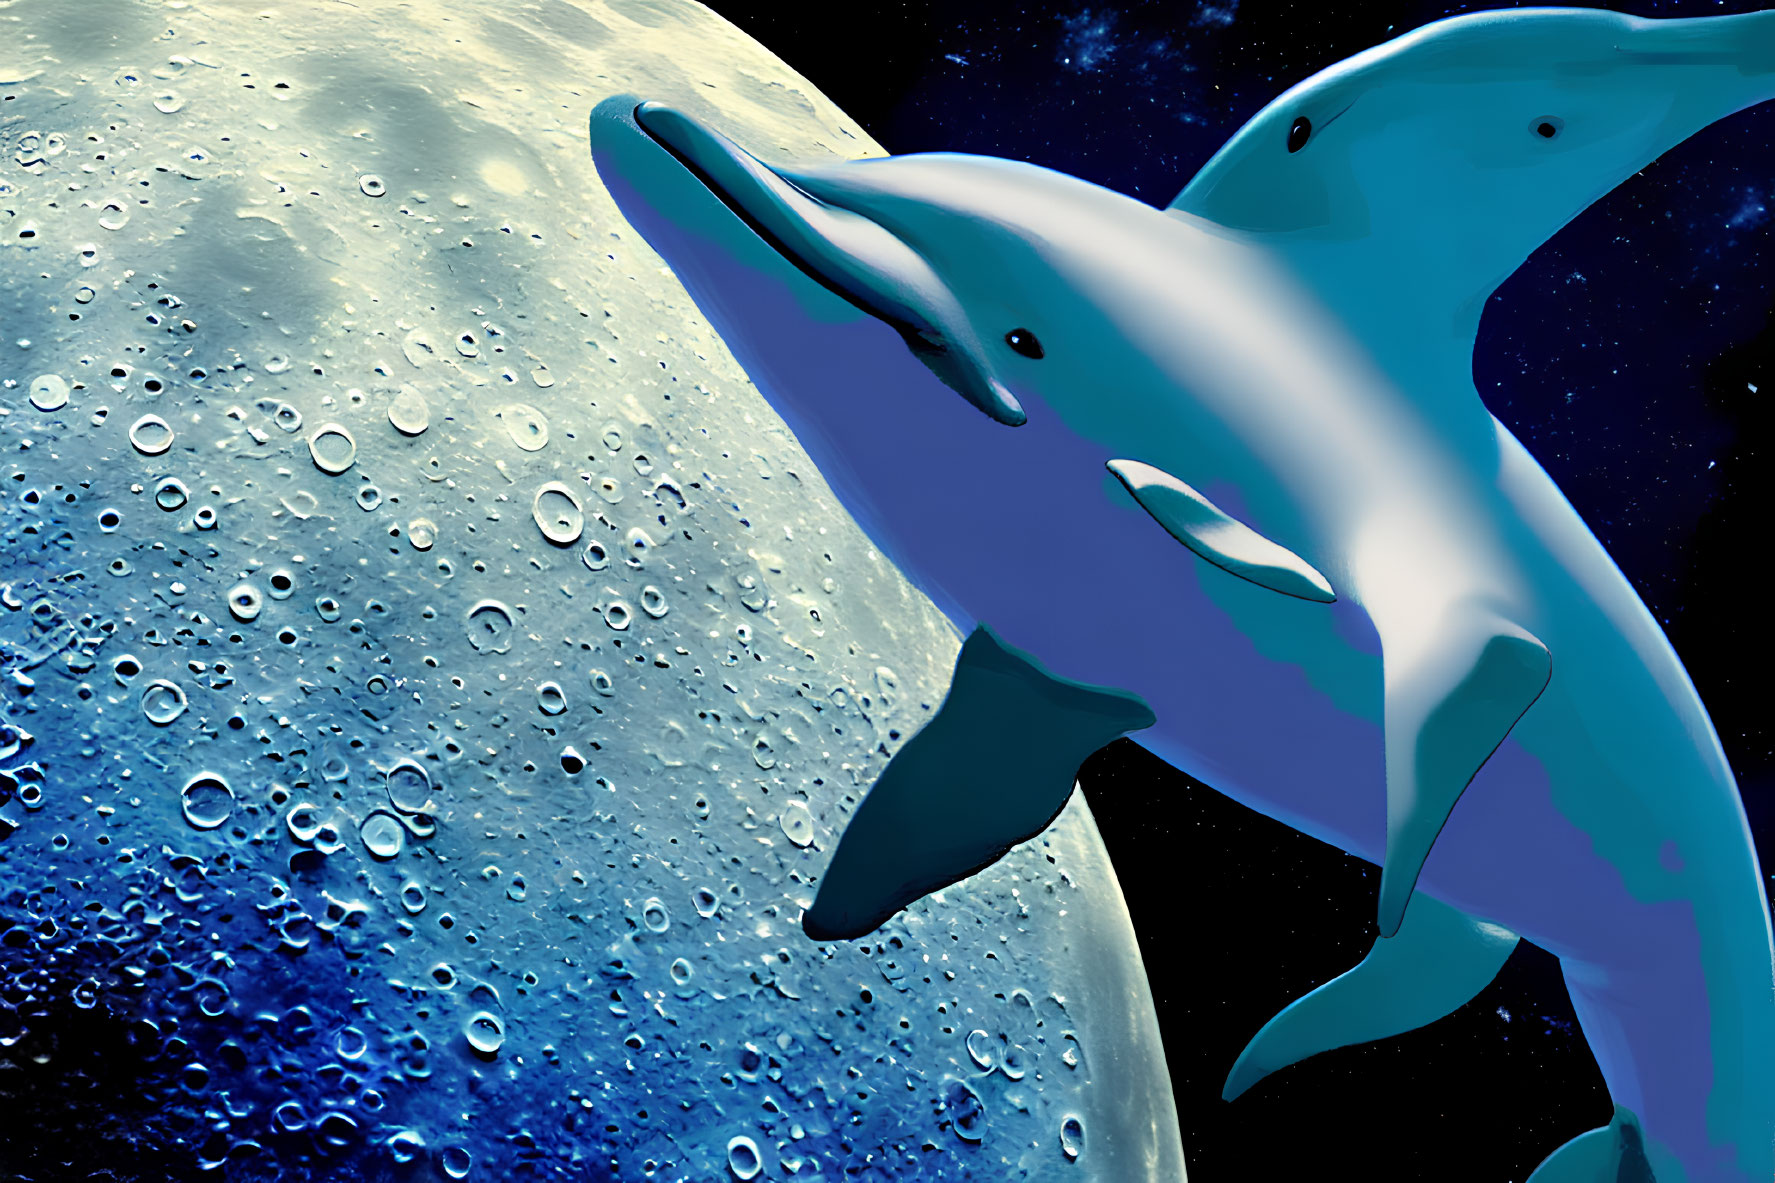 Surreal image: Dolphins on cosmic moon background